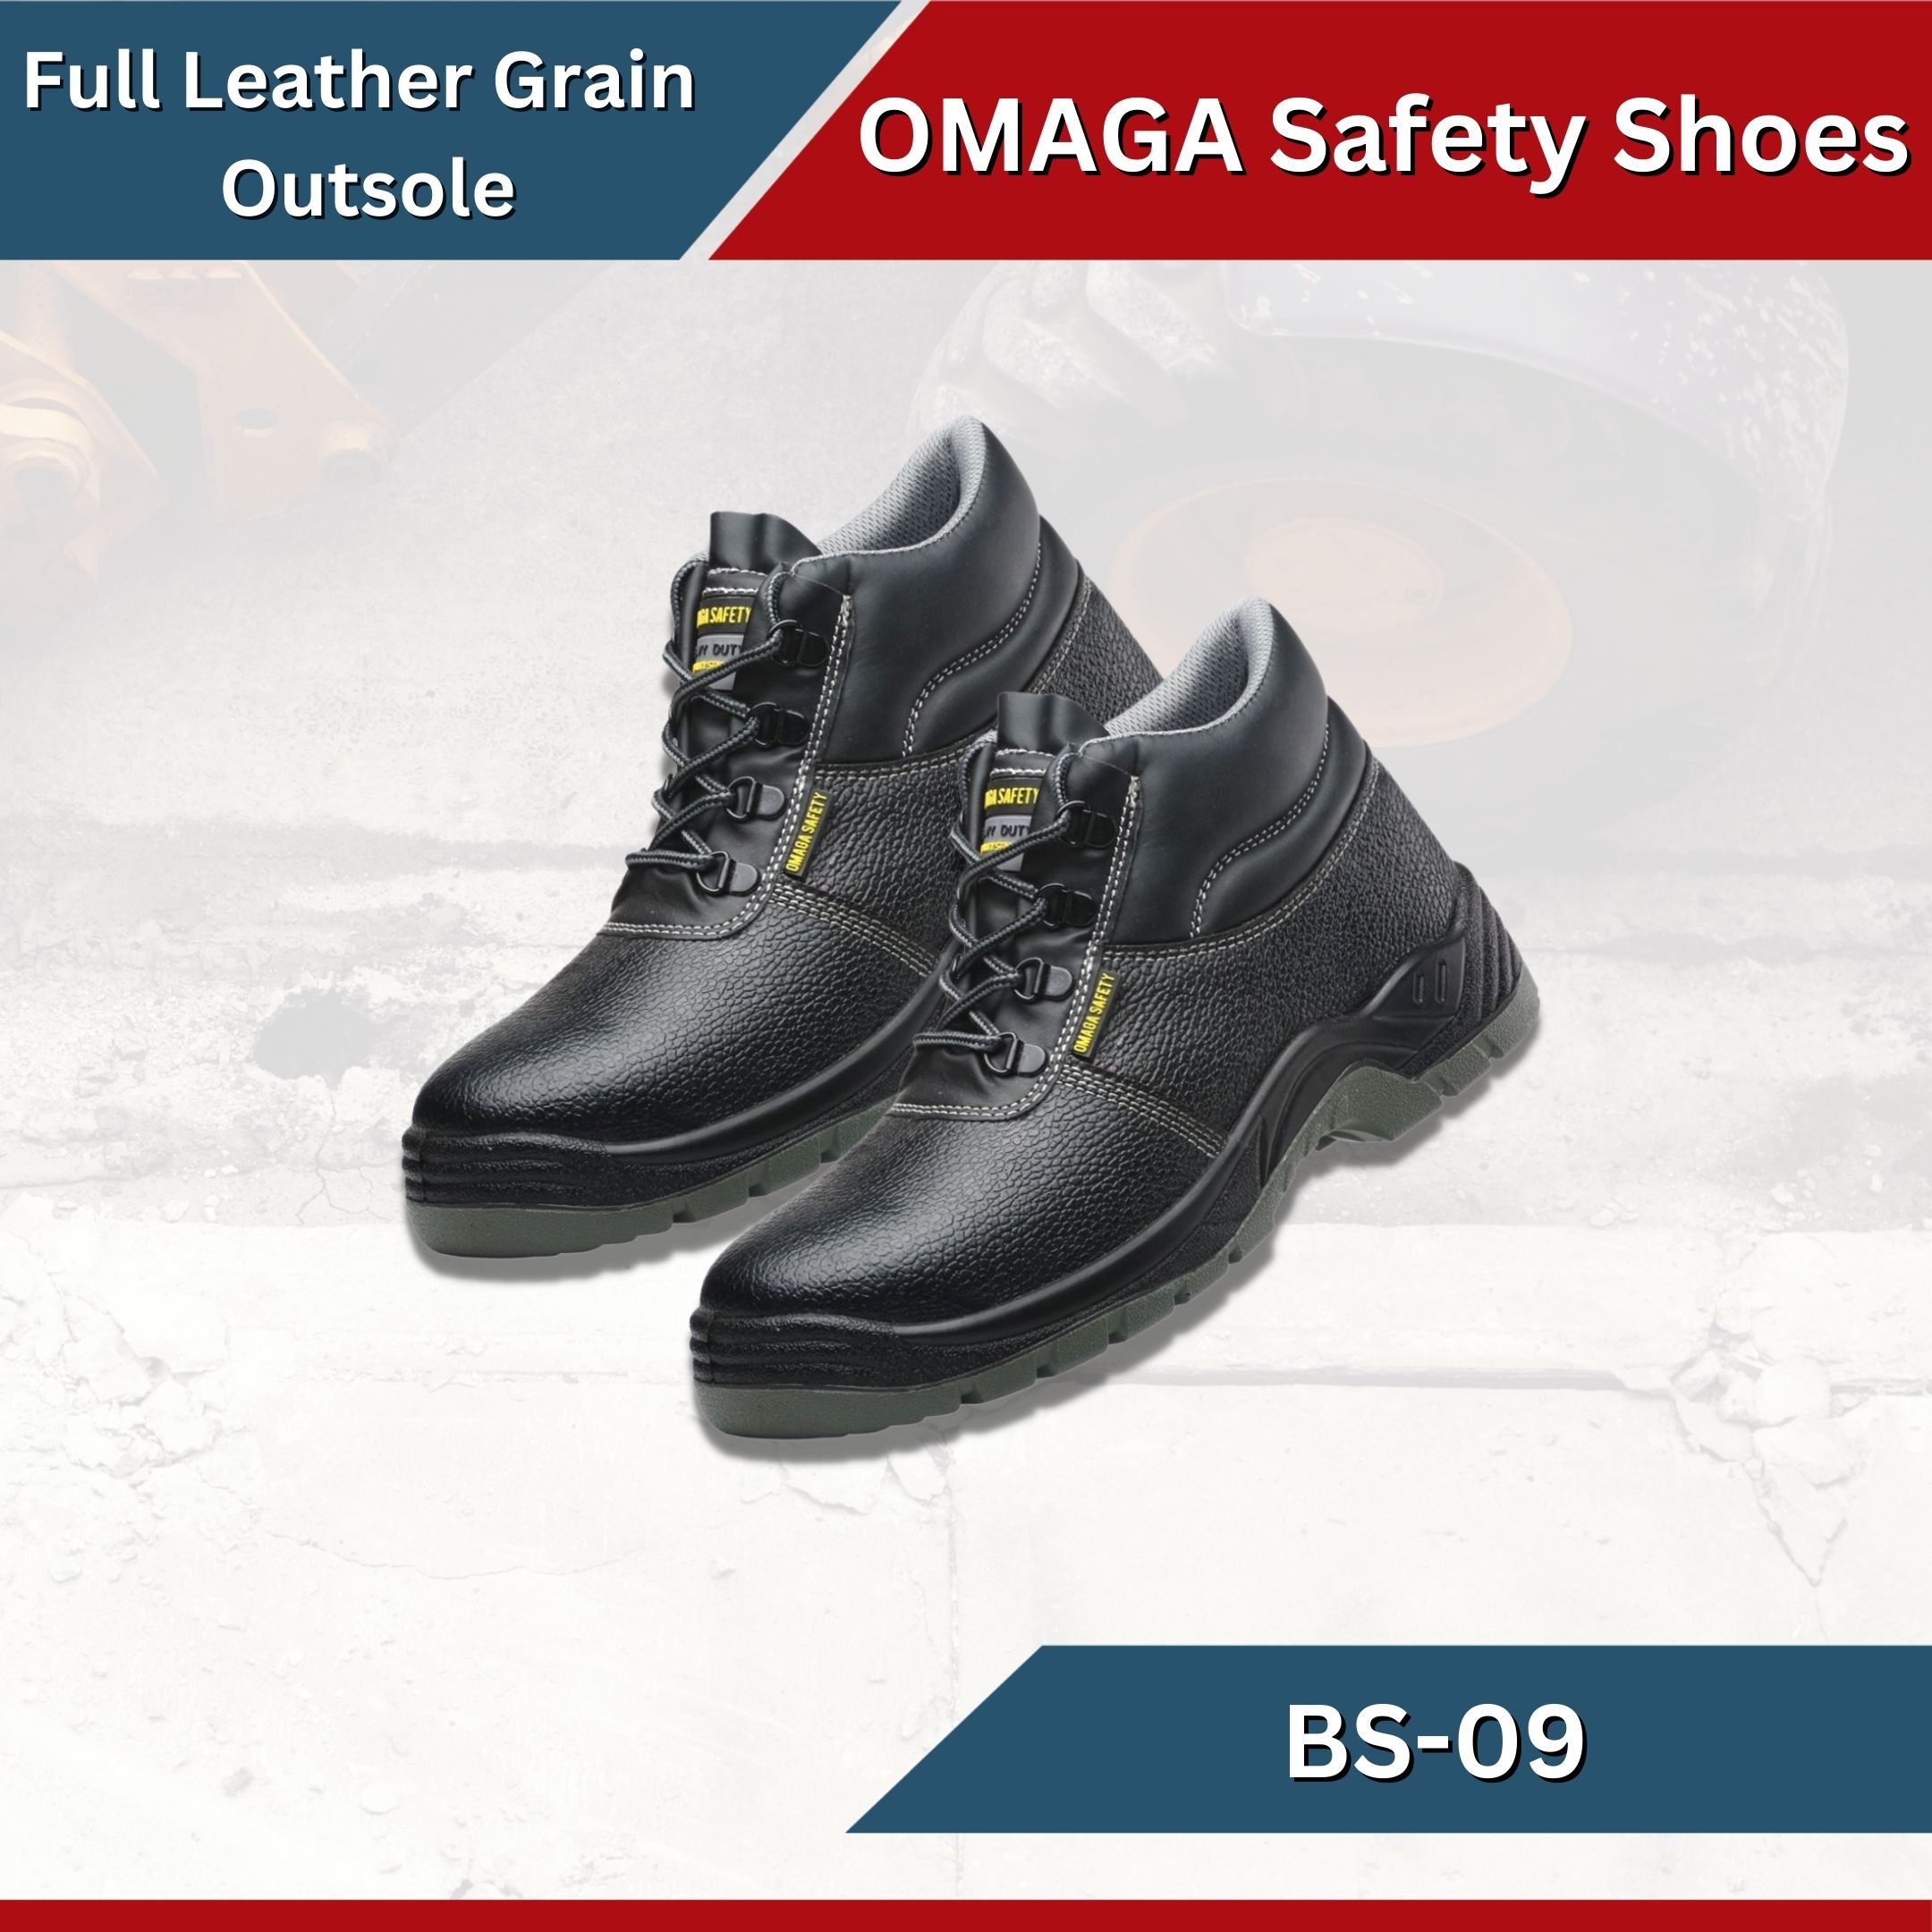 SLVR | MG Safety Shoes Full Leather Grain Outsole Carbon Steel Toe Cap  Shocksabsorber Sole Model: BS-09 | Lazada PH